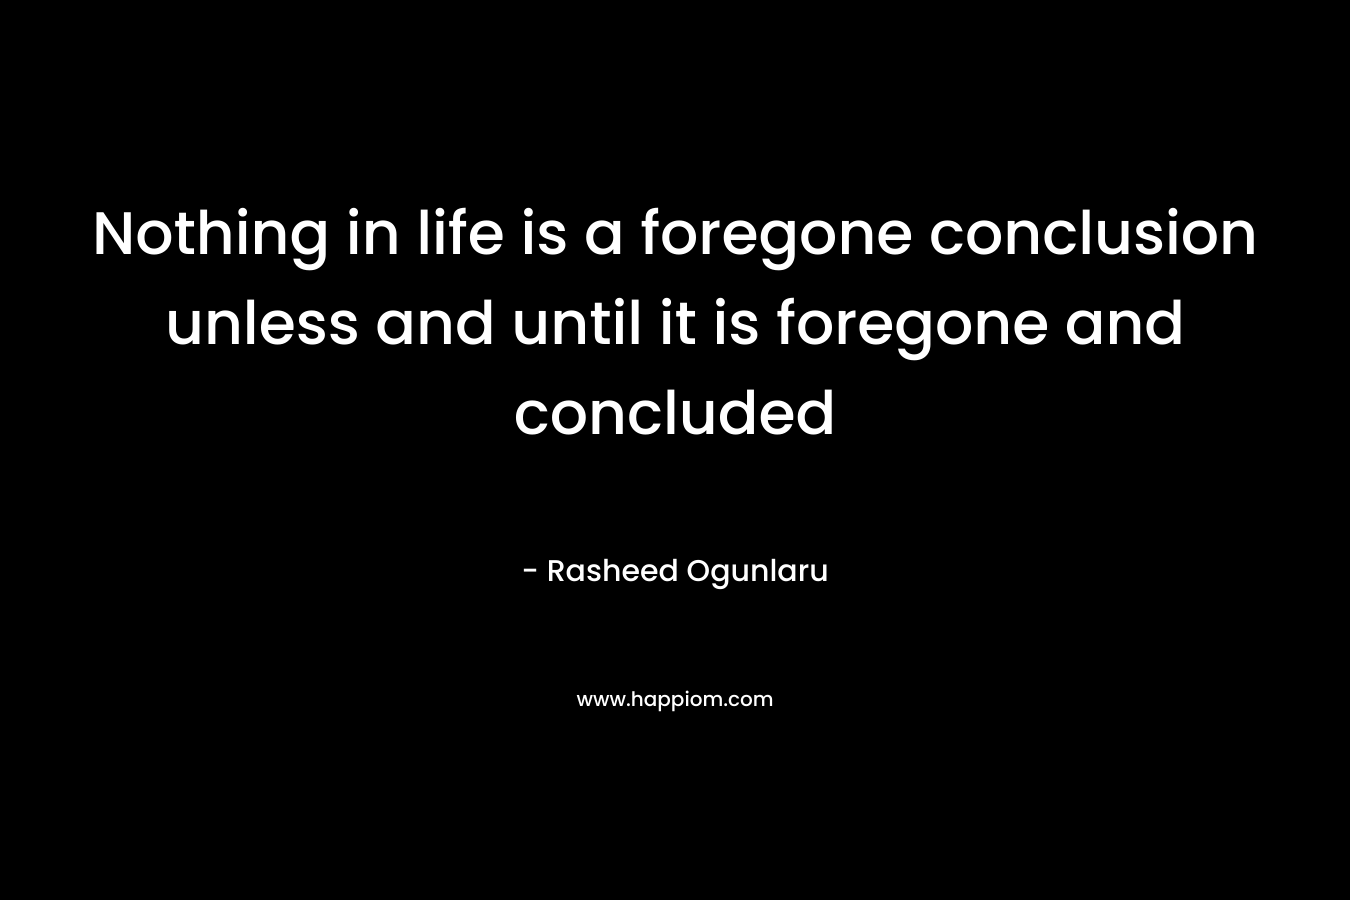 Nothing in life is a foregone conclusion unless and until it is foregone and concluded – Rasheed Ogunlaru